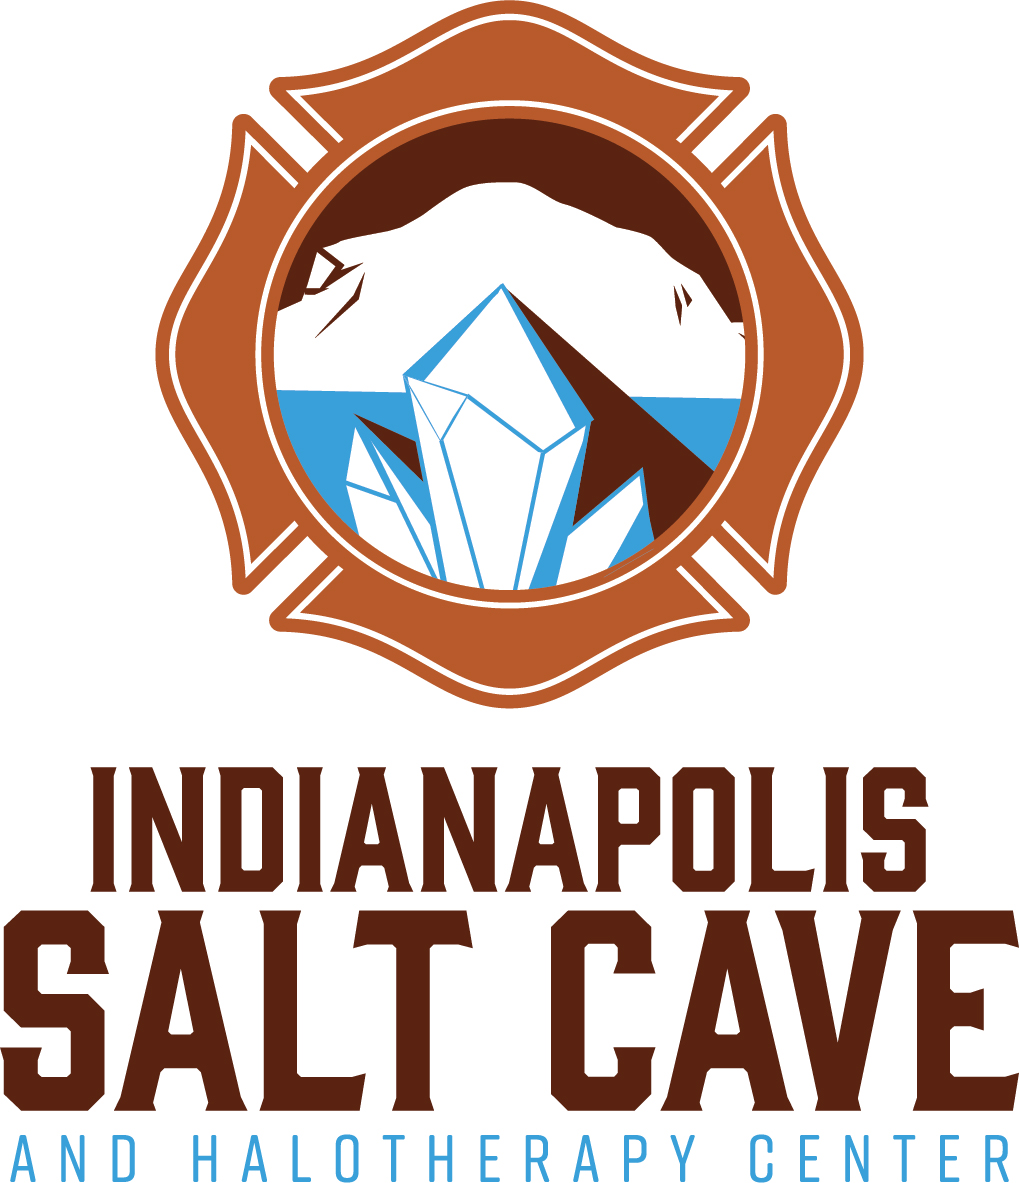 Indianapolis Salt Cave and Halotherapy Center